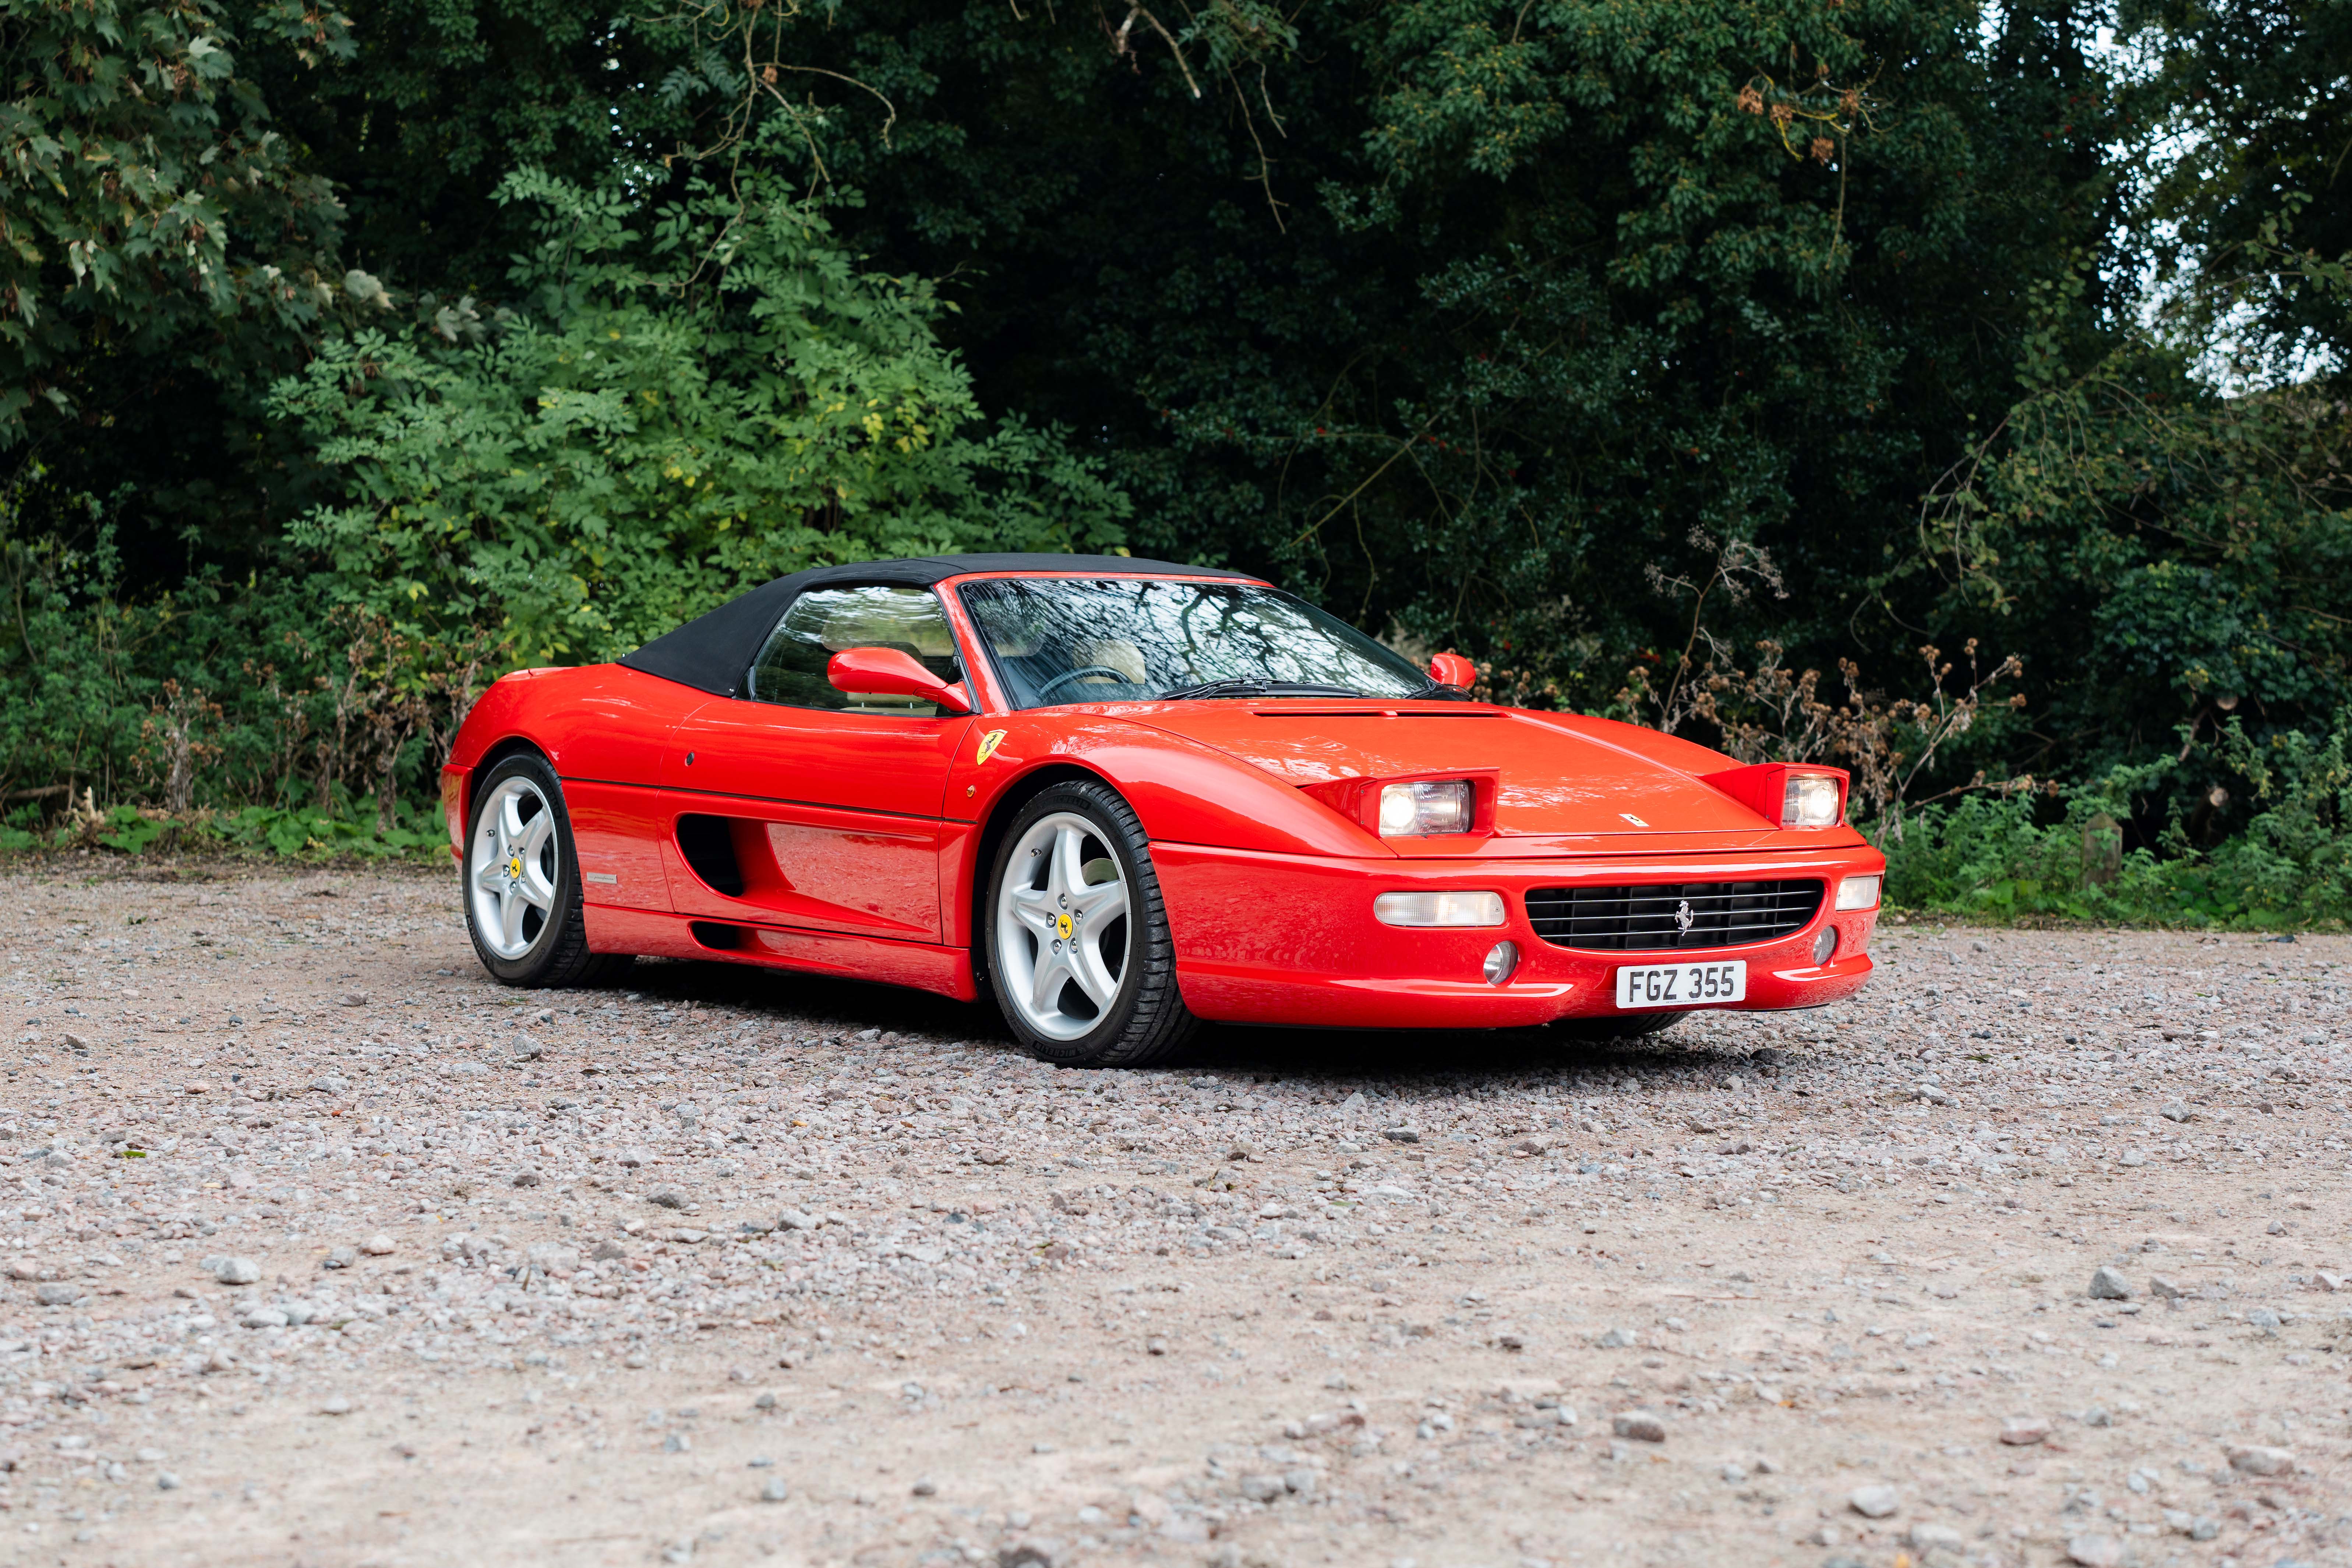 1996 Ferrari F355 Spider - Manual for sale by auction in Braintree 